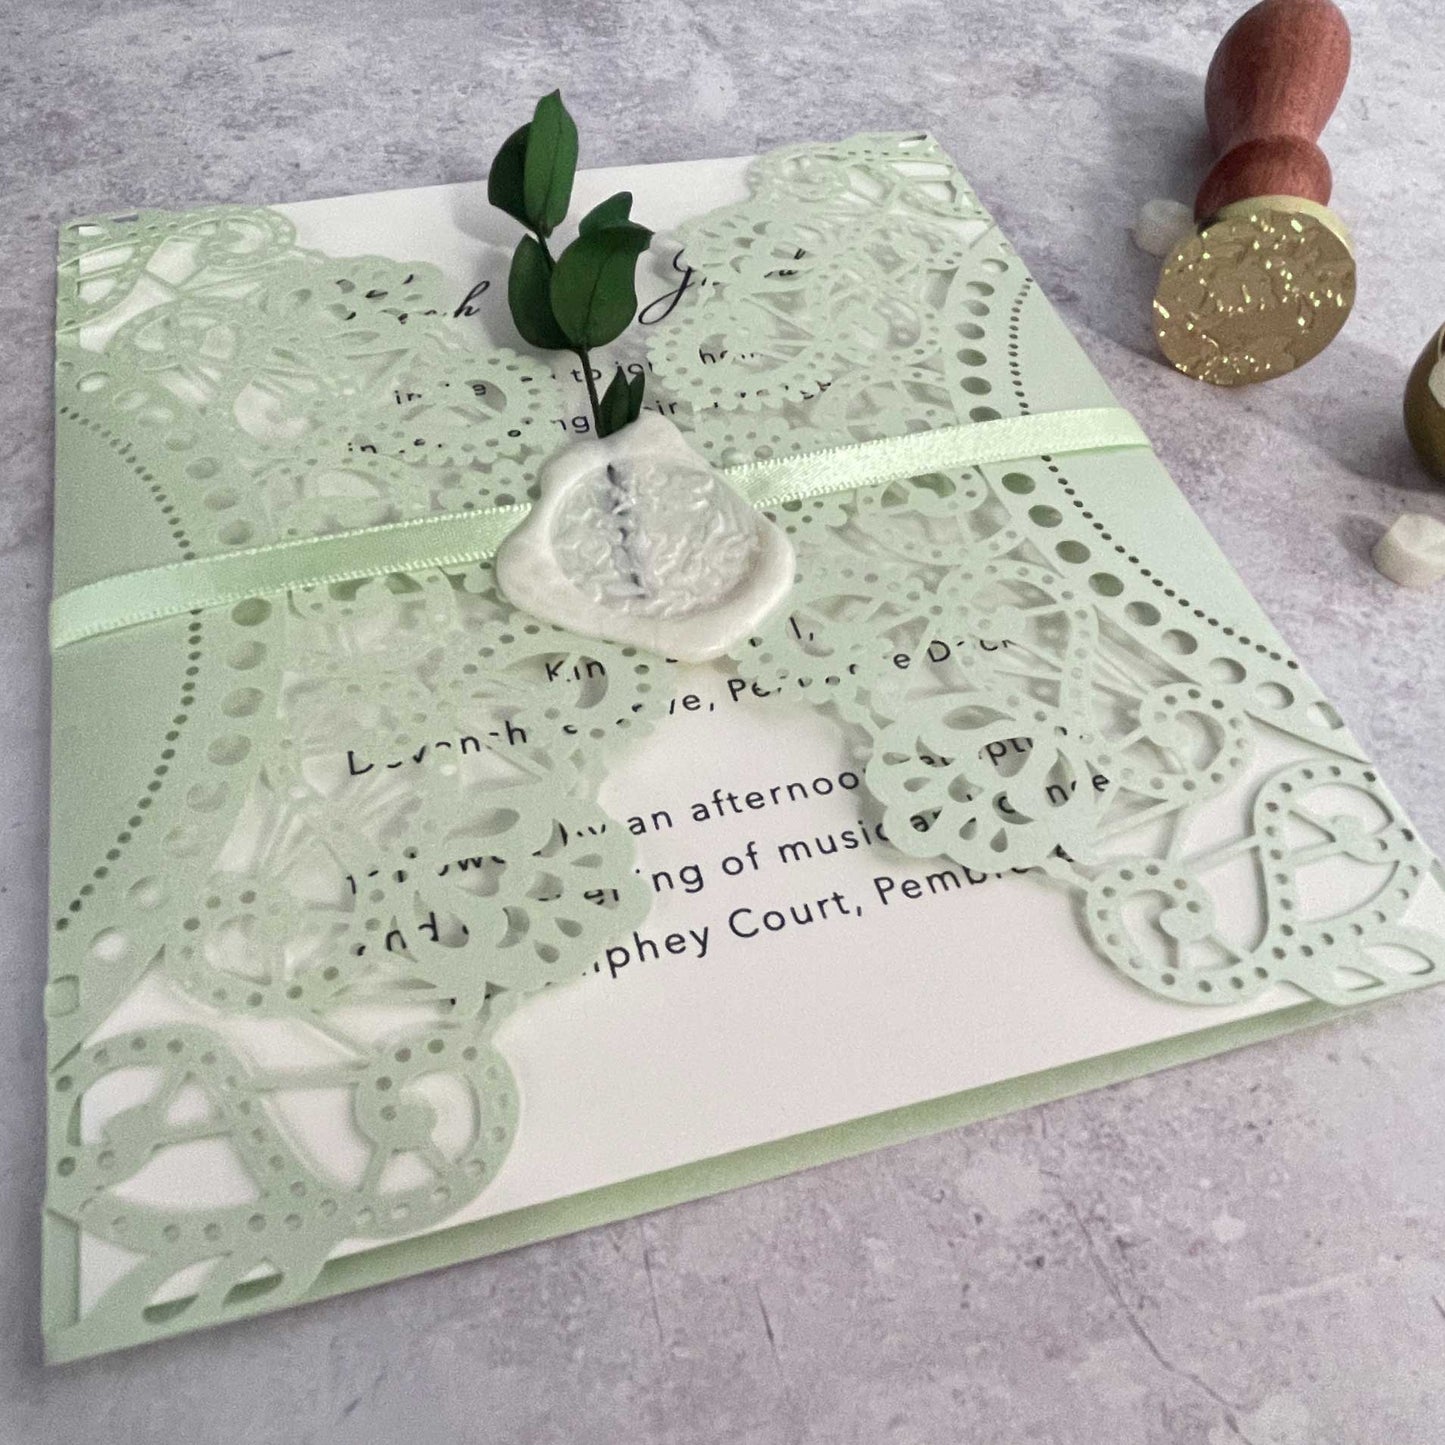 Doily Wedding Invitation - Pearlised Soft Green with insert and envelope  ImagineDIY   